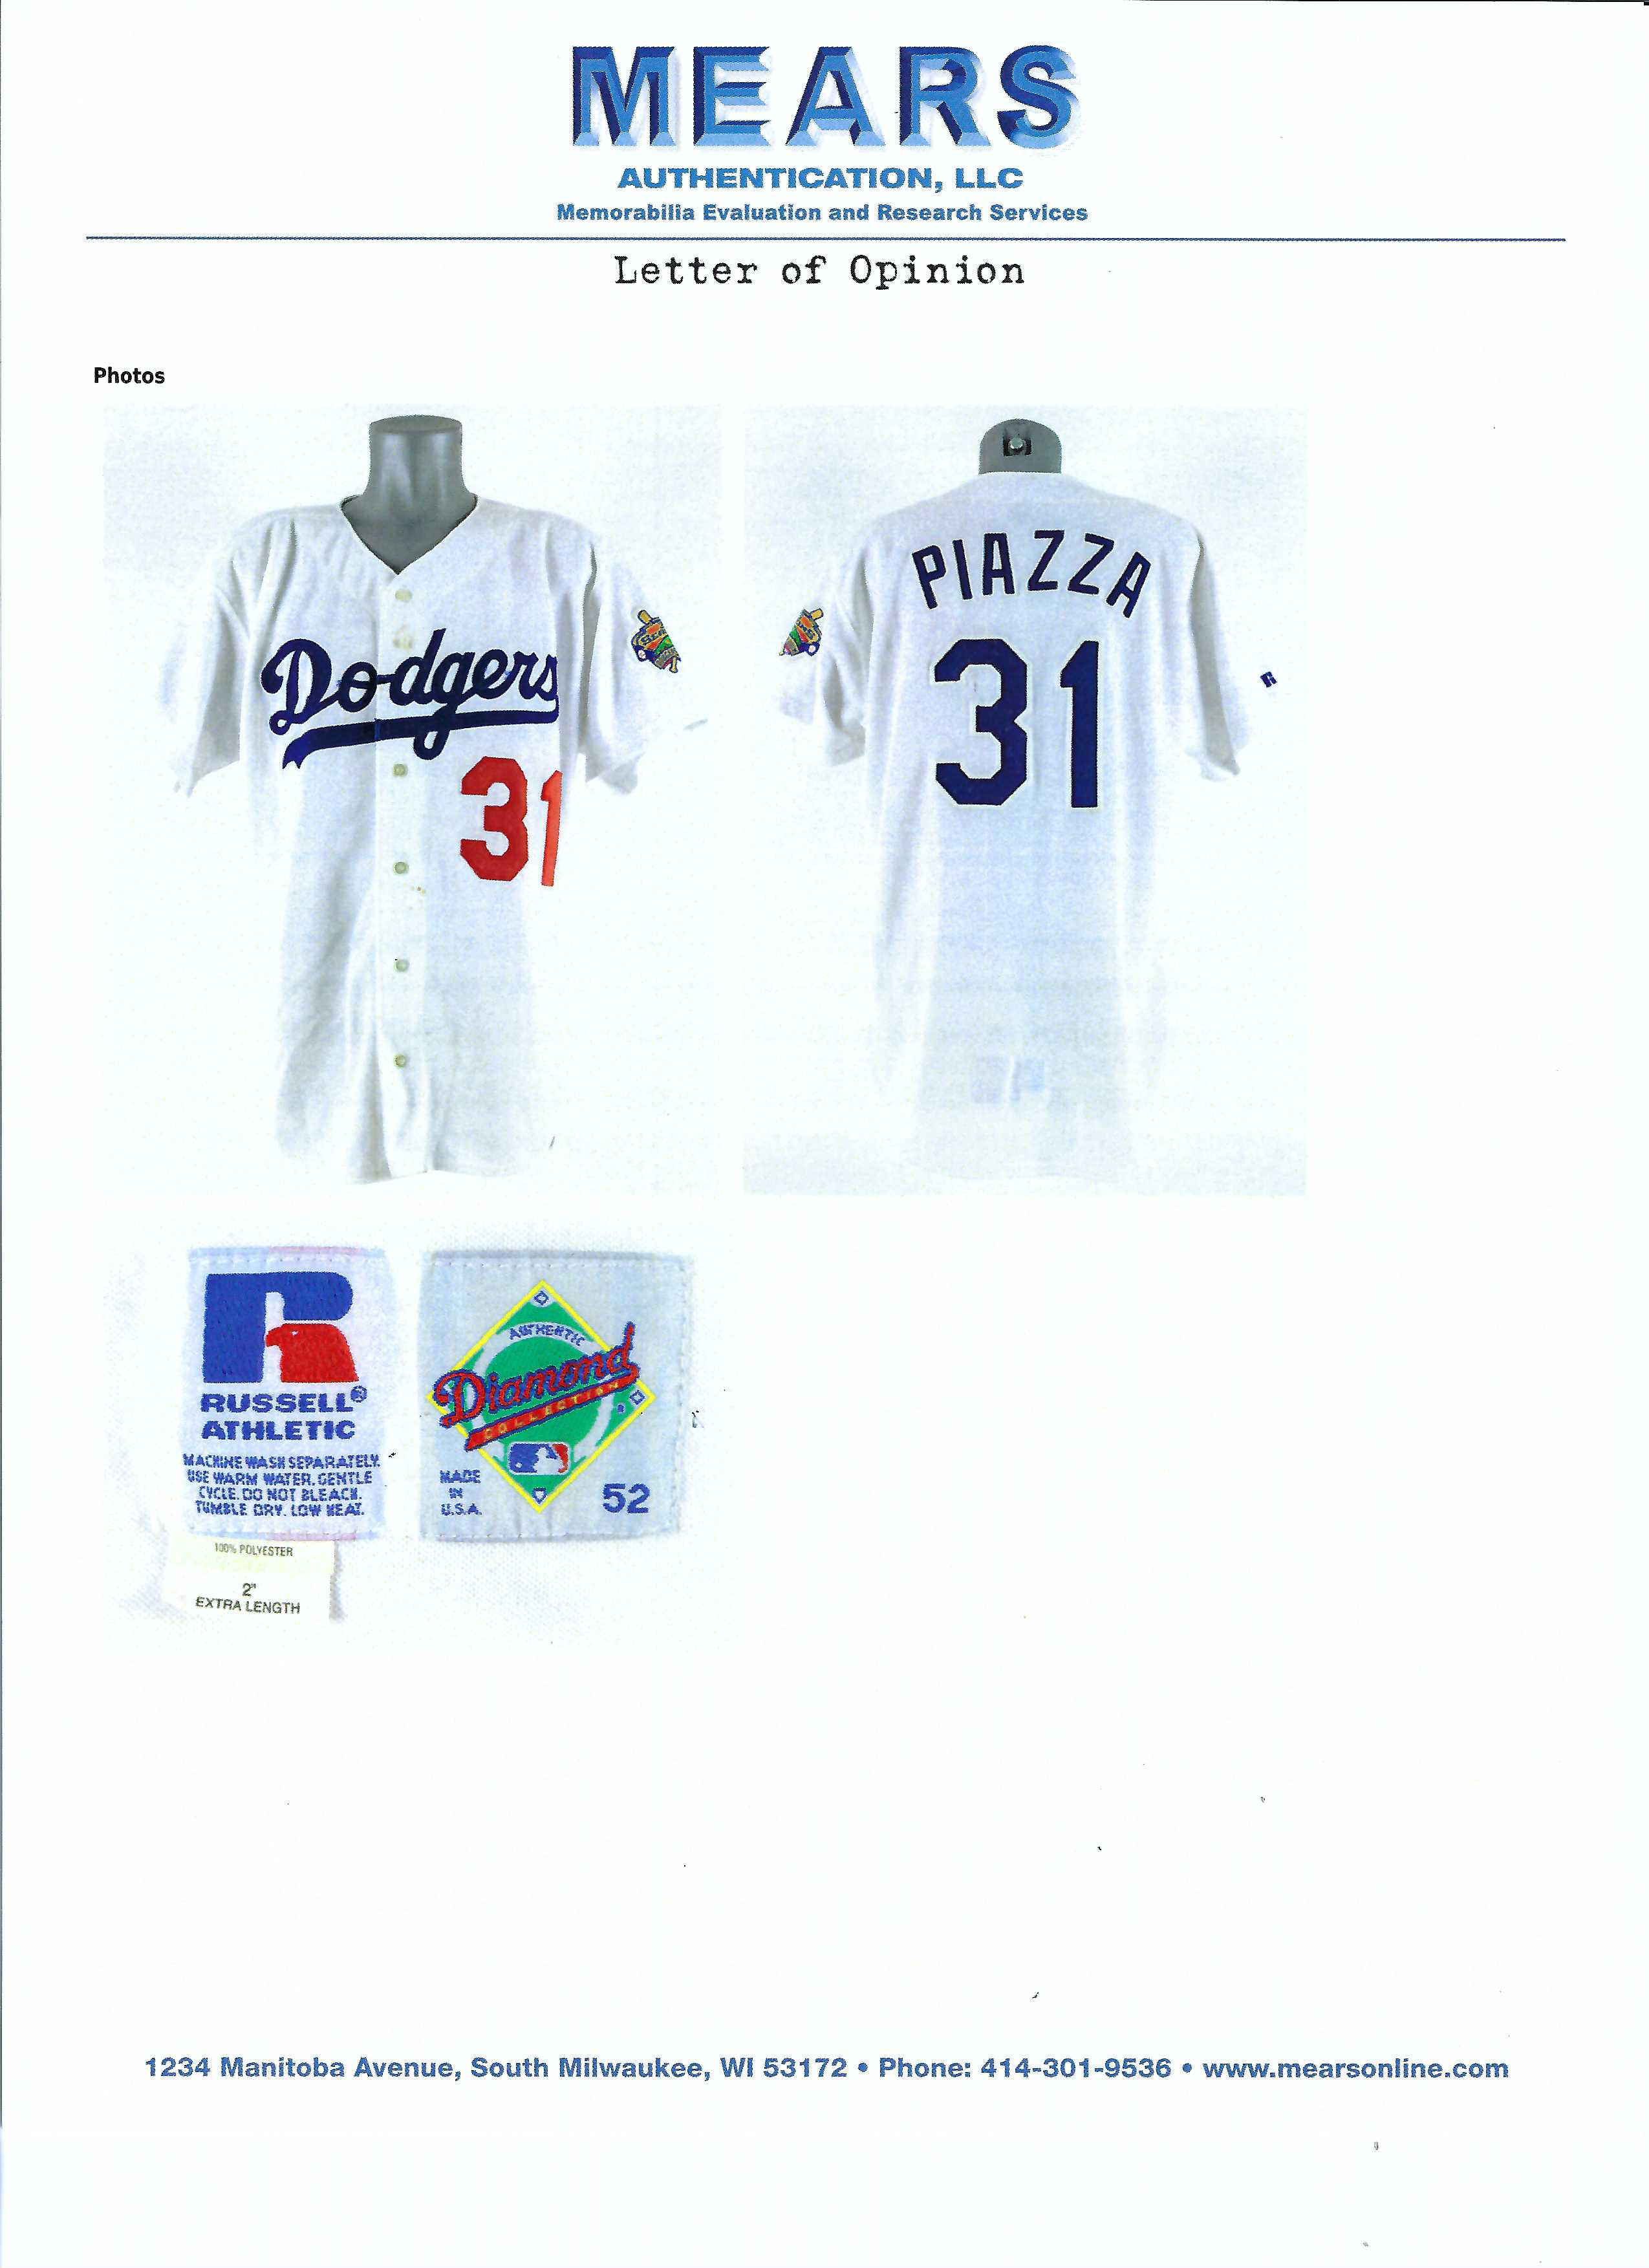 1996 AUTHENTIC RUSSELL MIKE PIAZZA LOS ANGELES DODGERS MLB BASEBALL JERSEY  SZ 52